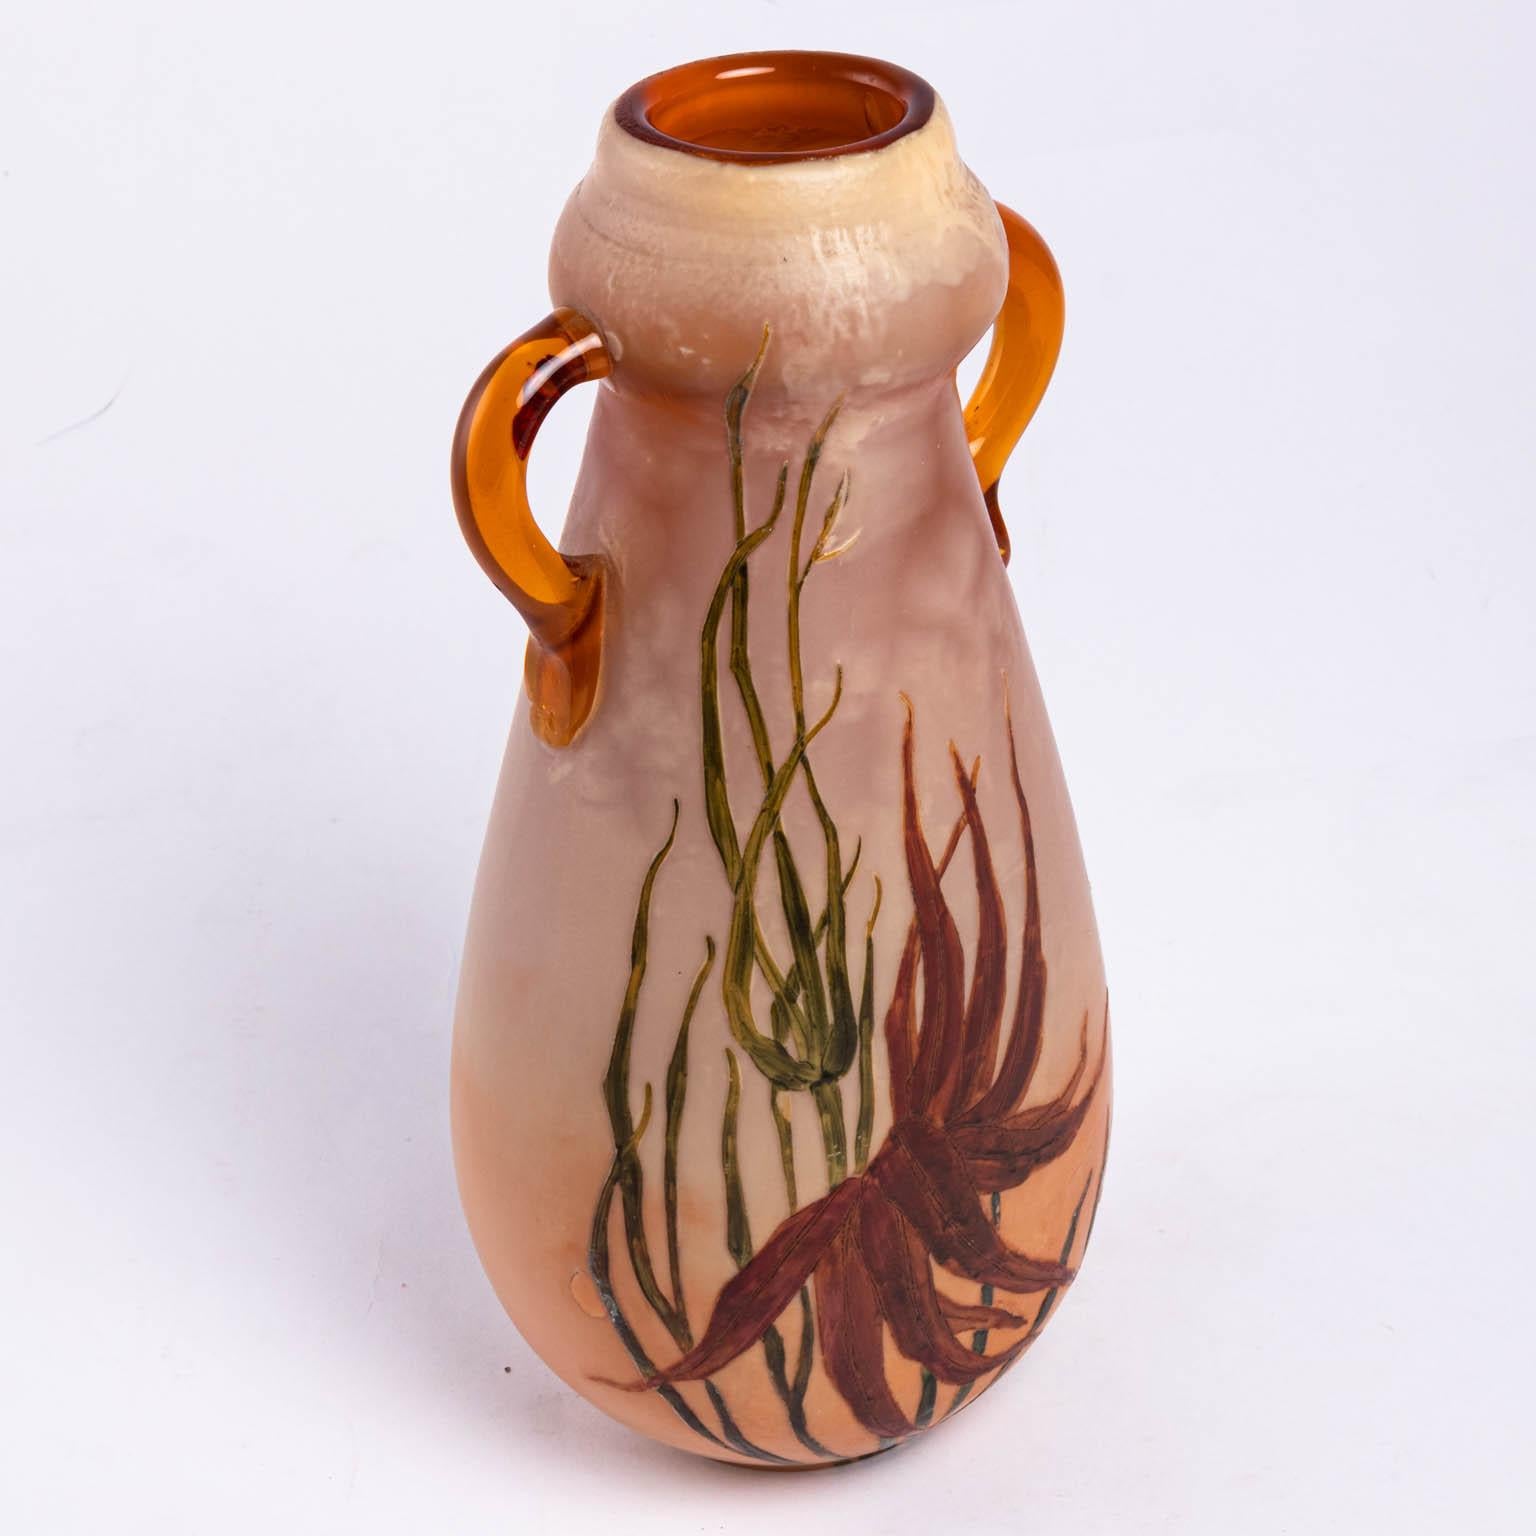 Tall Legras vase with handles in the Art Nouveau style, circa 1910s. The colors consist of amber and green. Made in France. Please note of wear consistent with age including popped air bubbles due to the manufacturing process and a small repair